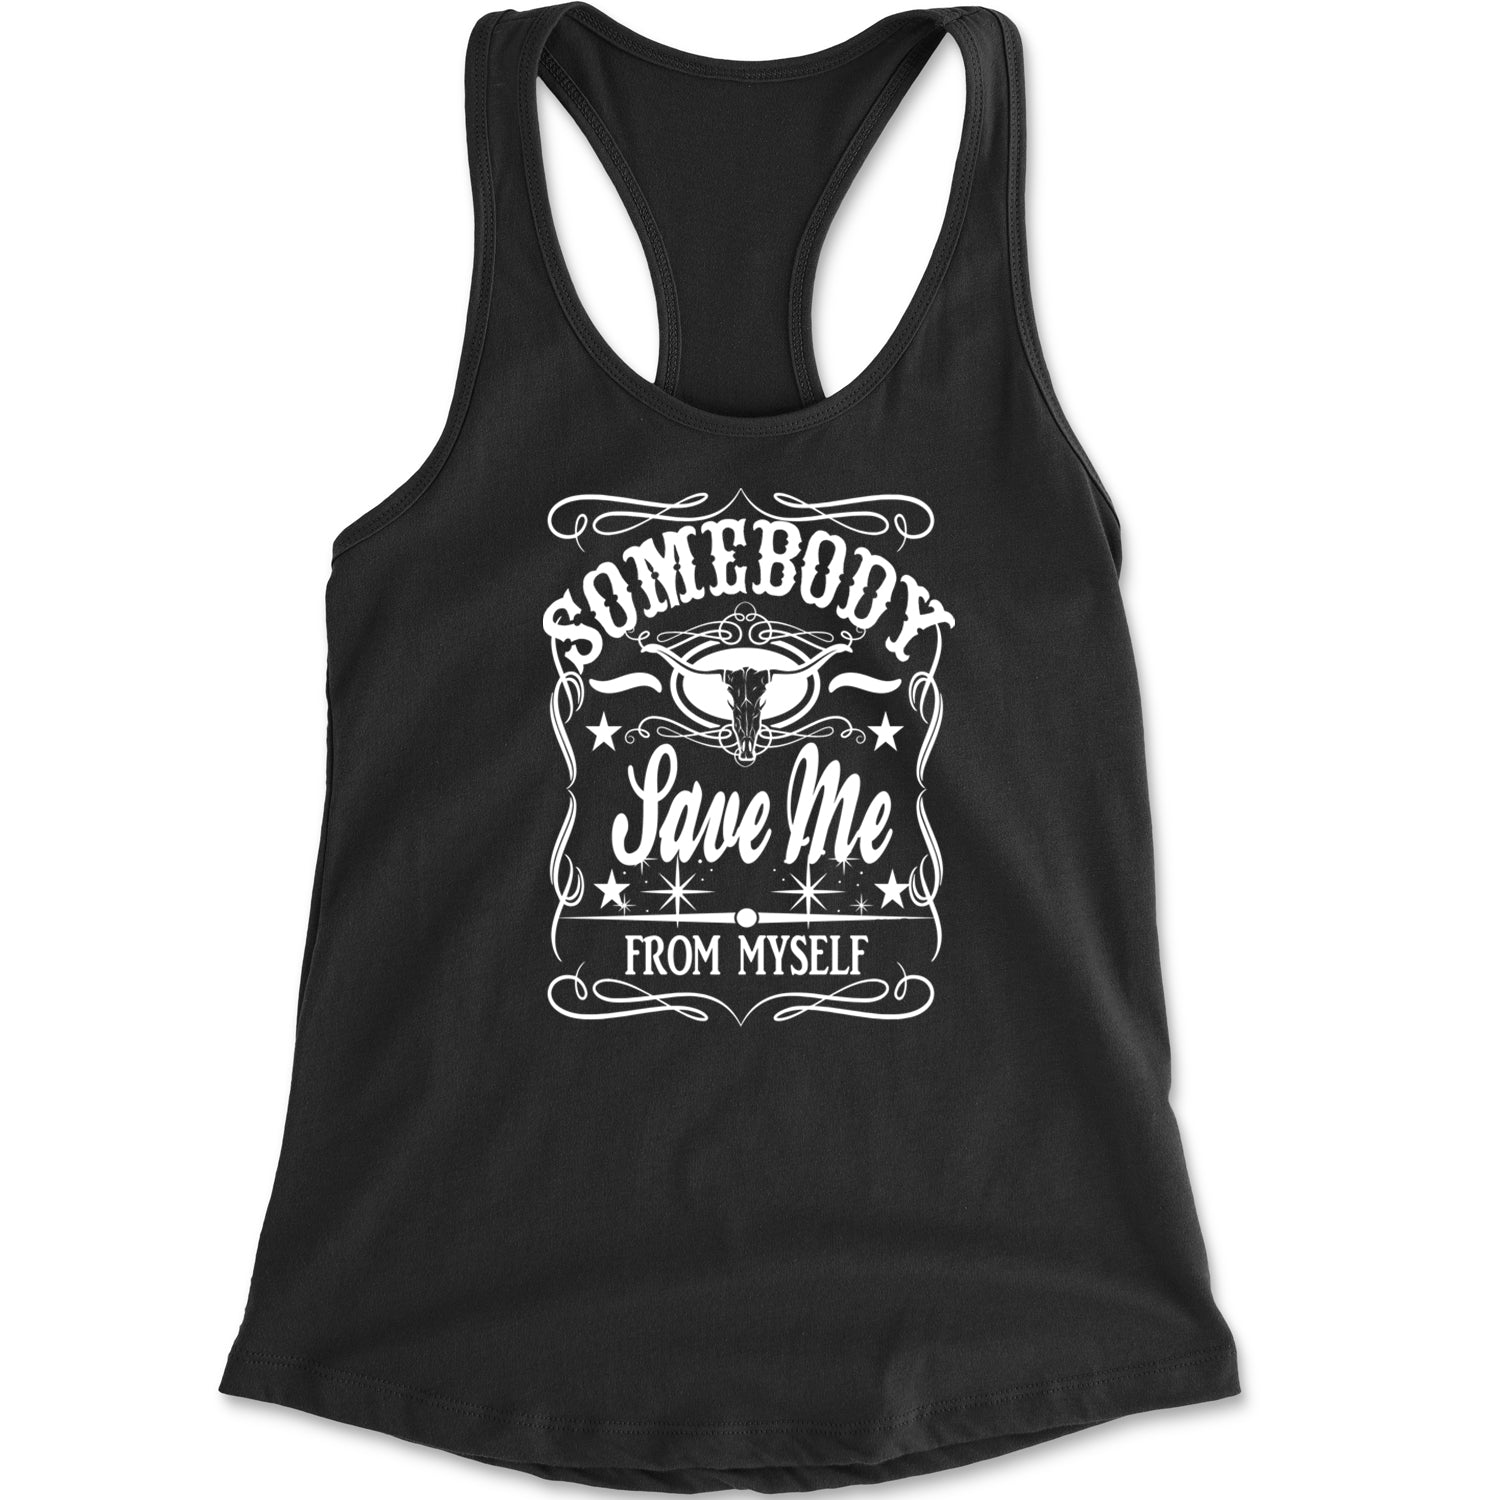 Somebody Save Me From Myself Son Of A Sinner Racerback Tank Top for Women